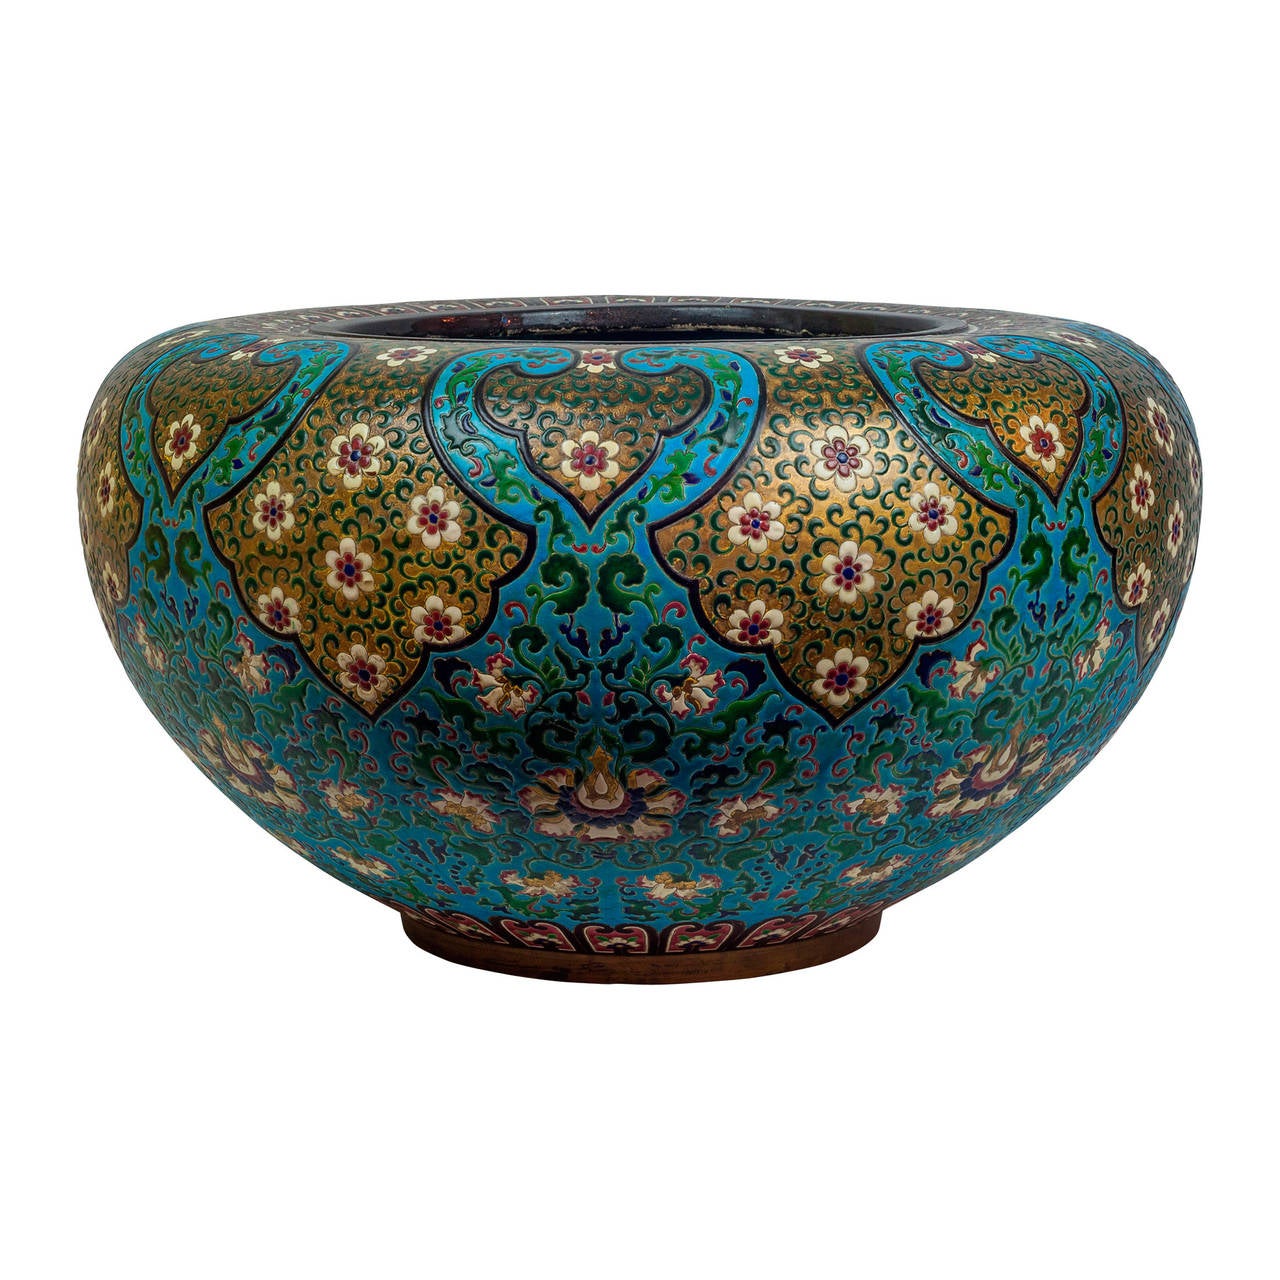 A massive and unusual pottery porcelain bowl in Islamic taste.
Stock number: PP19.